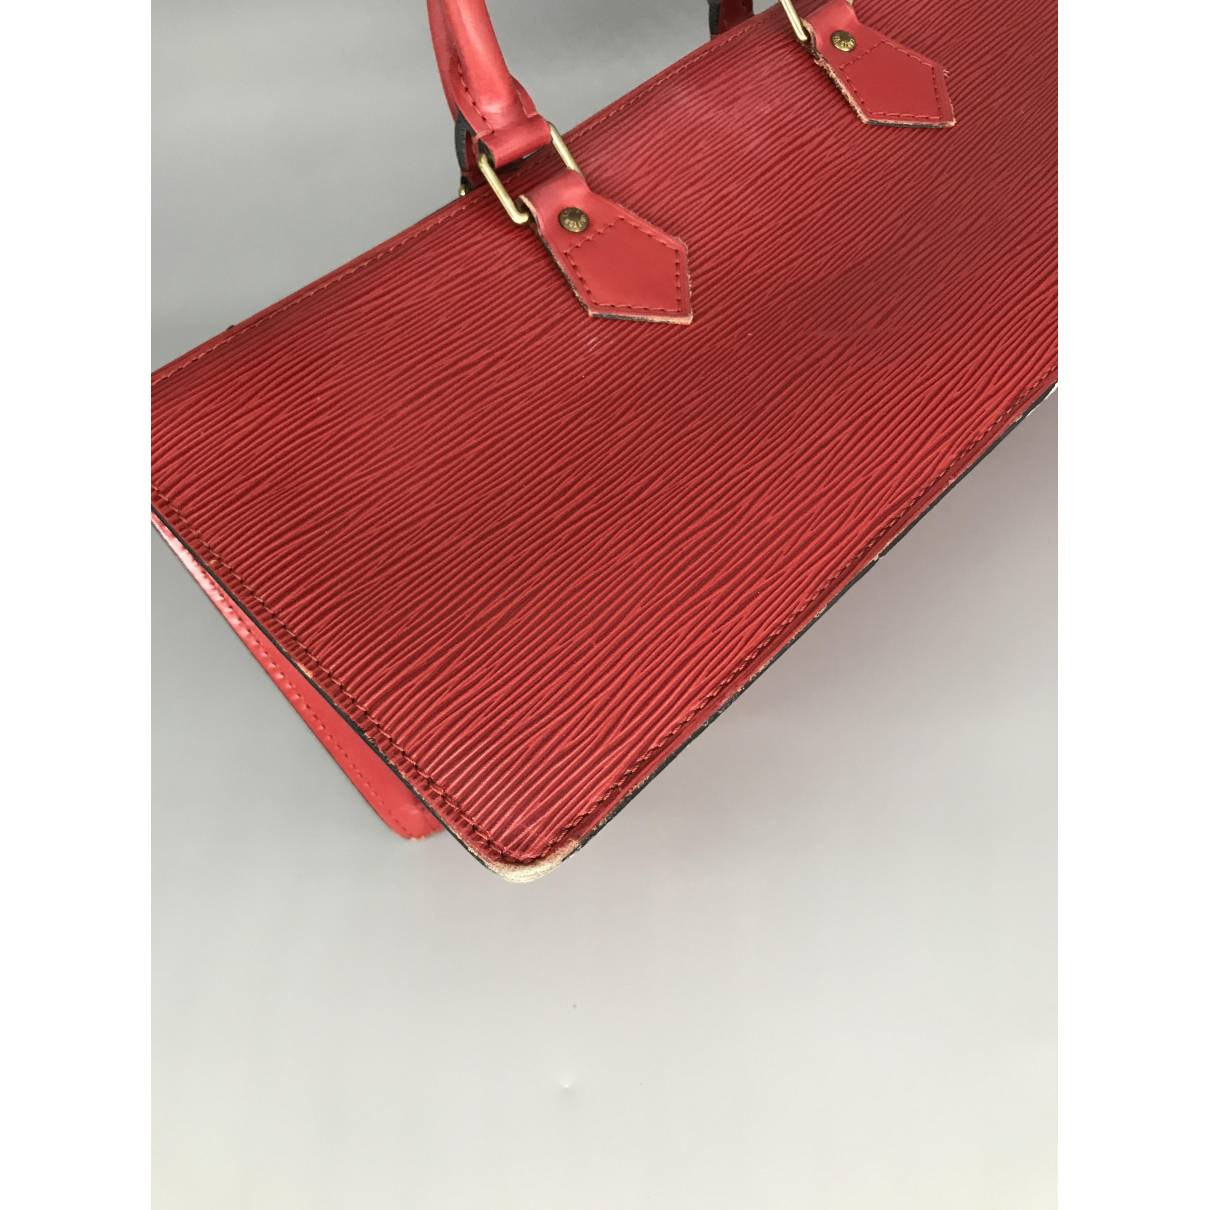 Authentic Louis Vuitton Epi Leather Red Sac Triangle Hand Bag